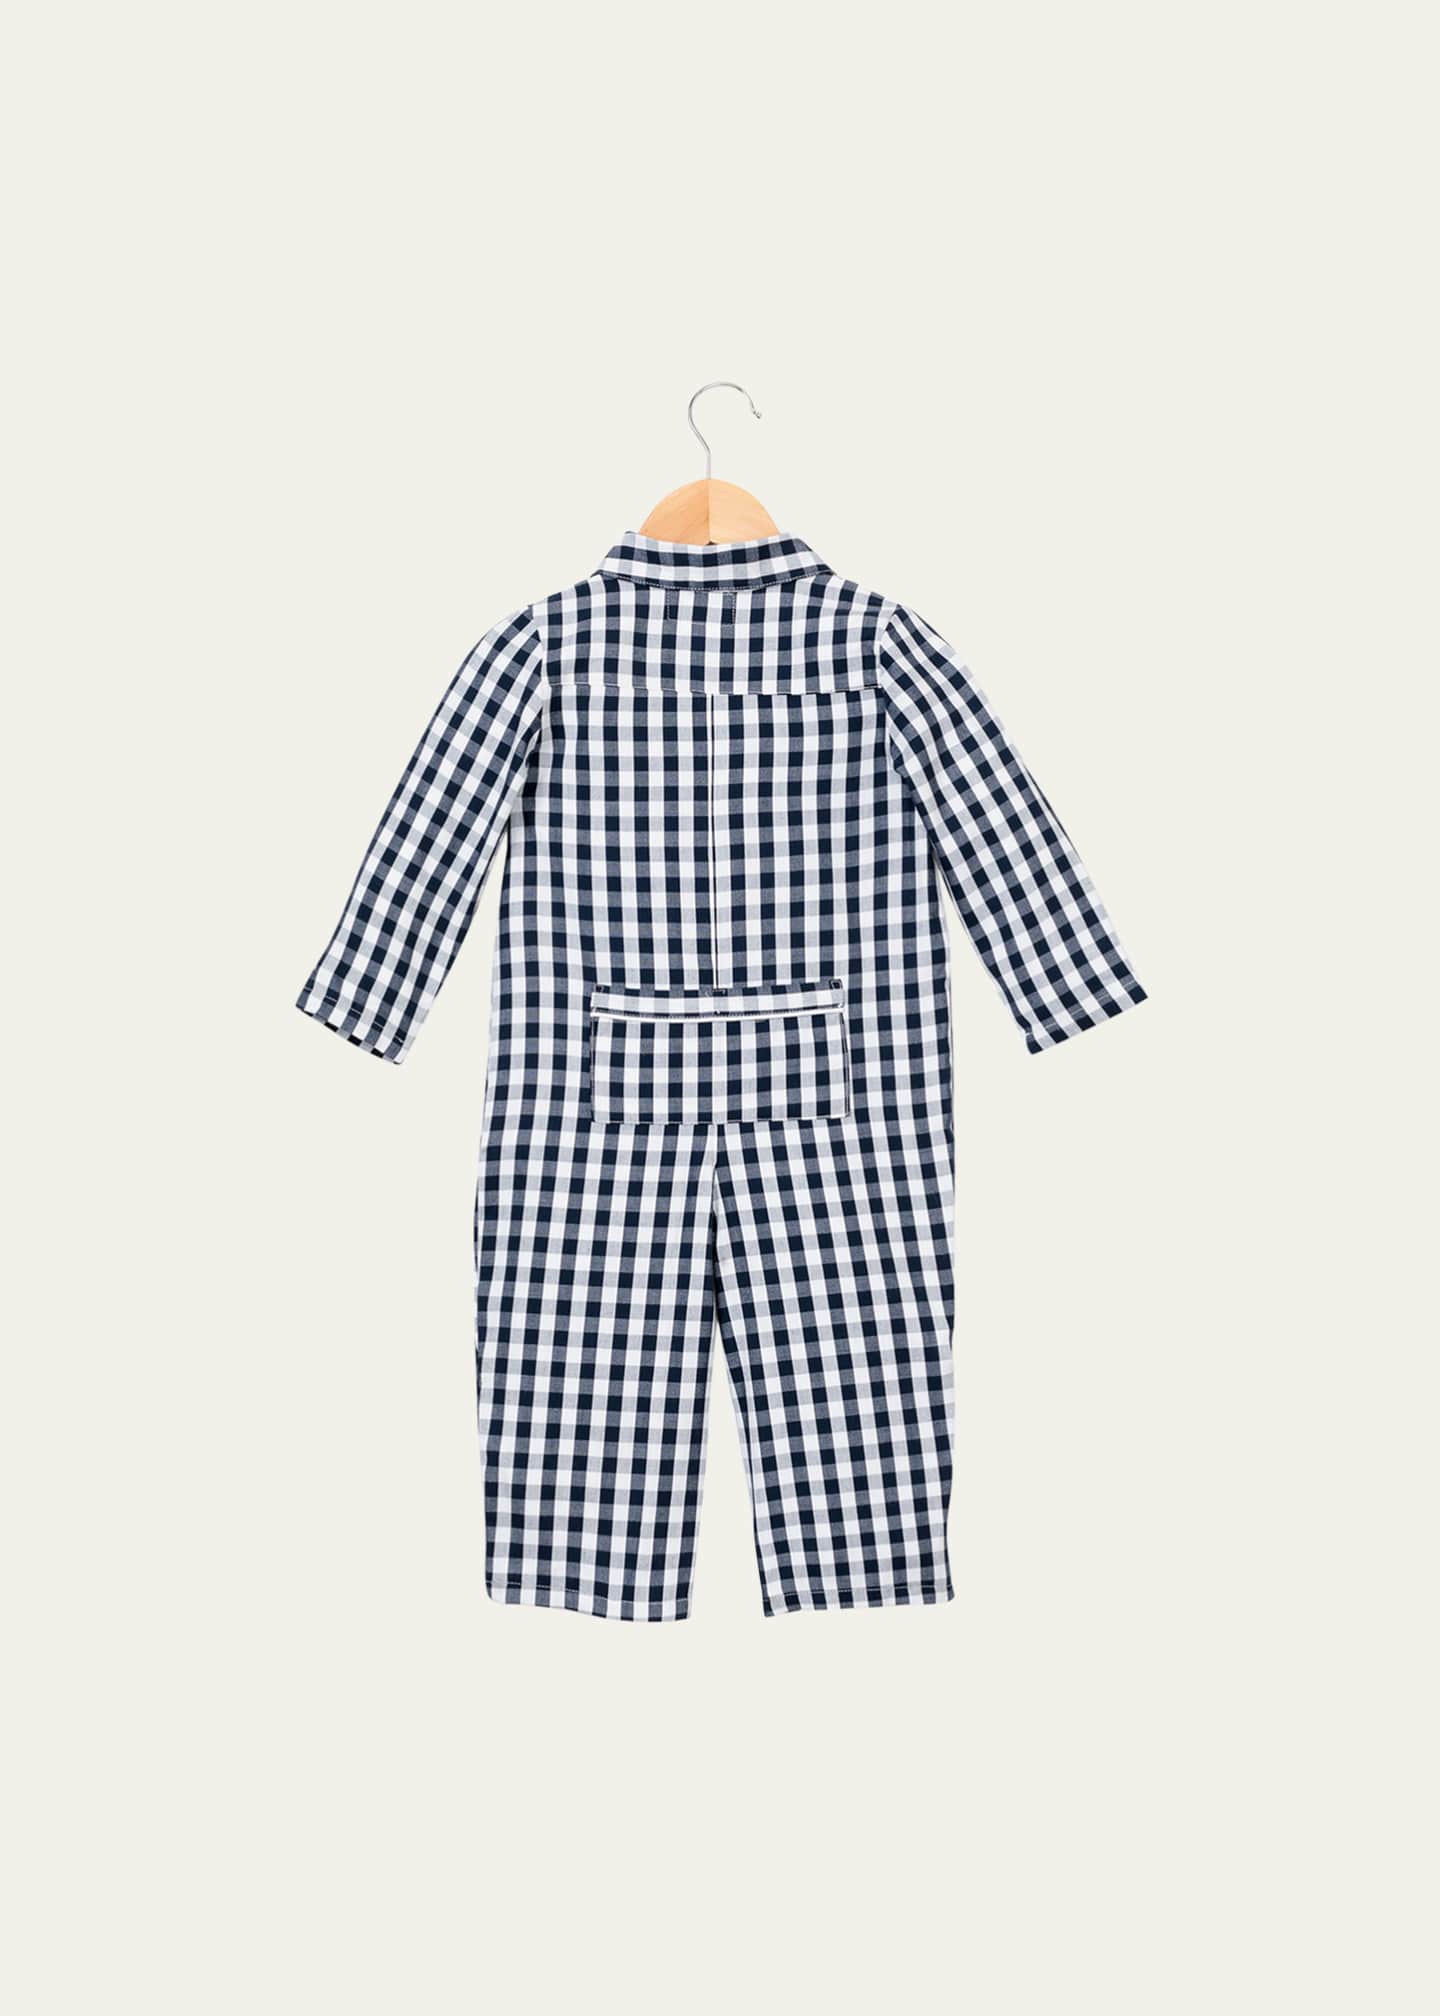 Petite Plume Gingham Coverall, Size 0-24 Months Image 2 of 2